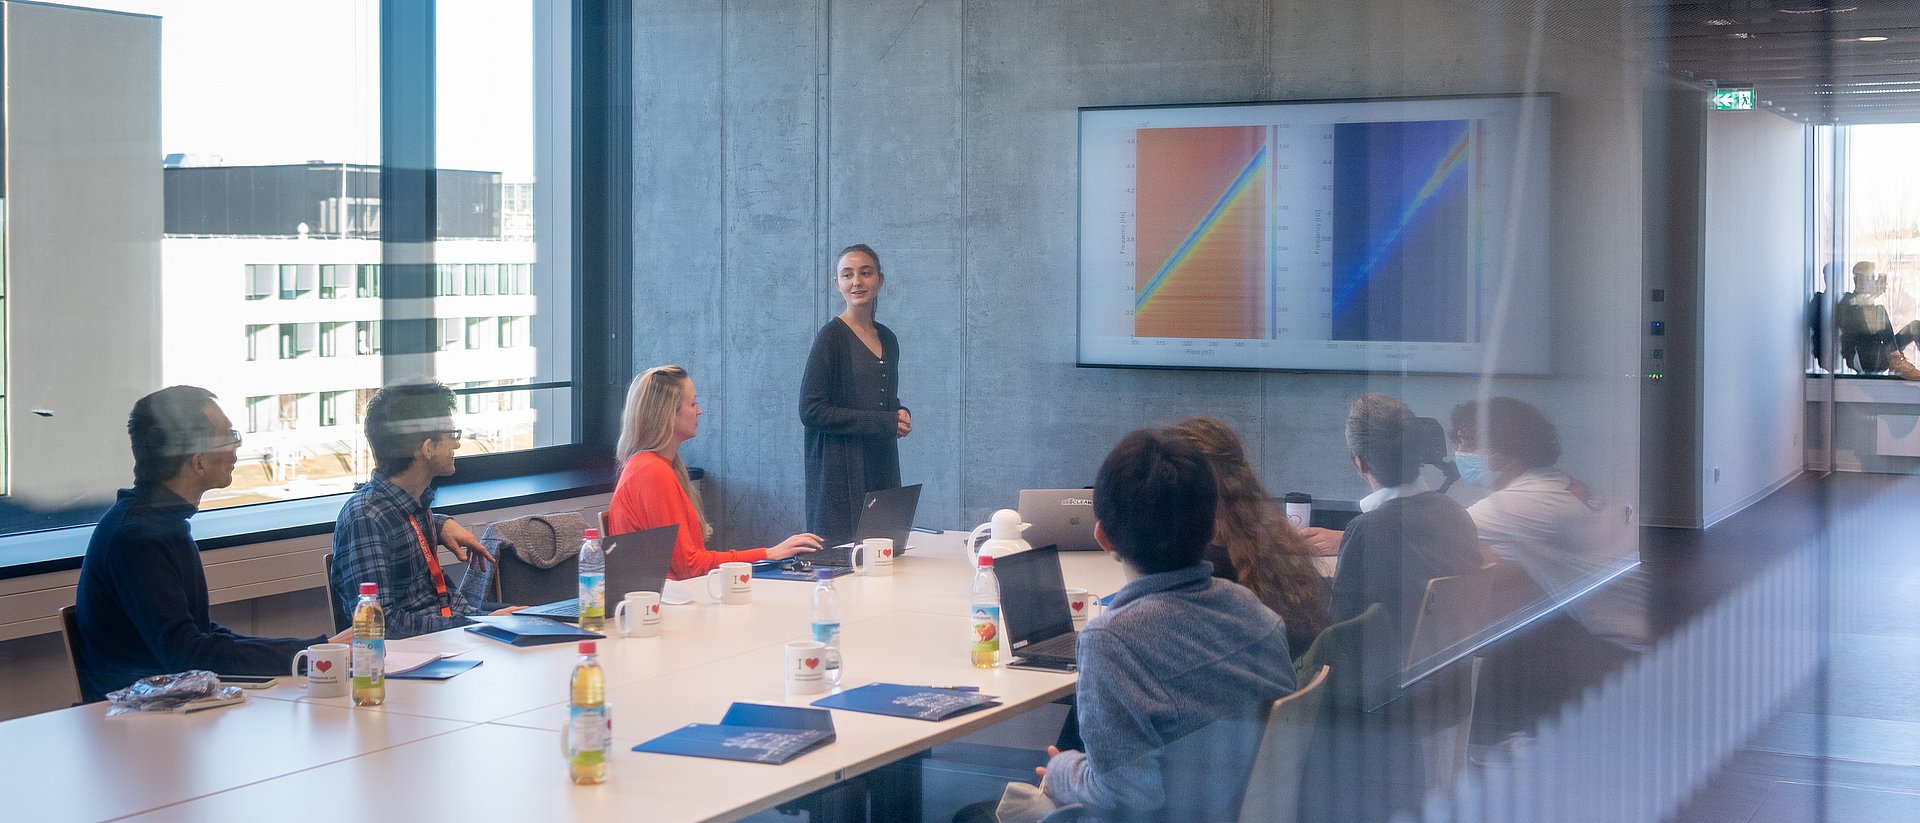 A woman leads through a presentation in a seminar room photographed through a pane of glass. She is standing at a conference table where 7 other people are sitting. A graphic is projected on the wall.